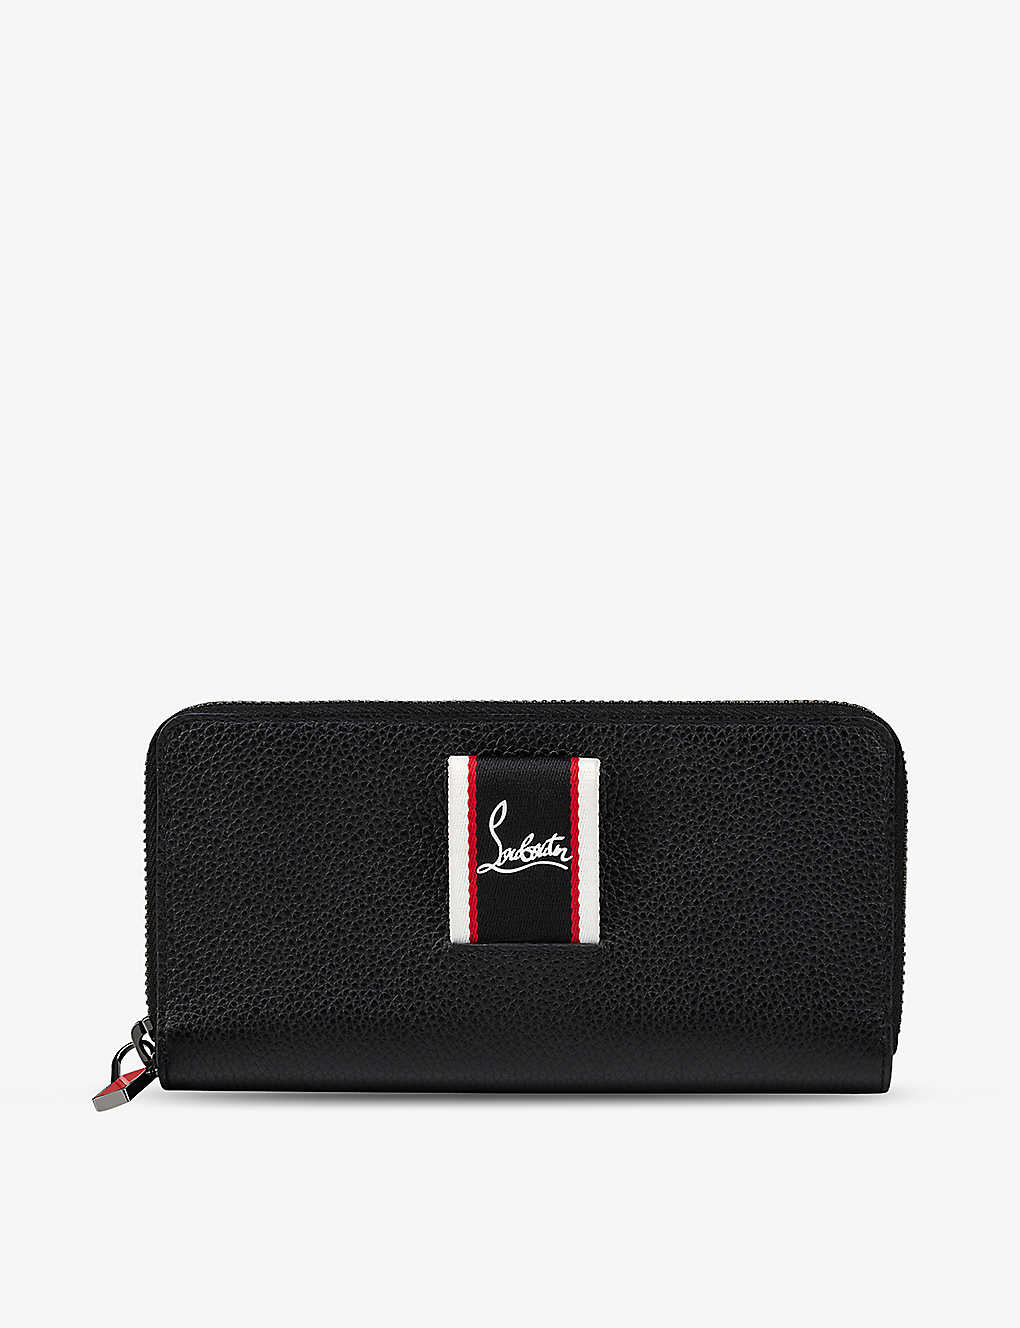 Christian Louboutin Mens Black F.a.v. Branded-tab Grained-leather Wallet